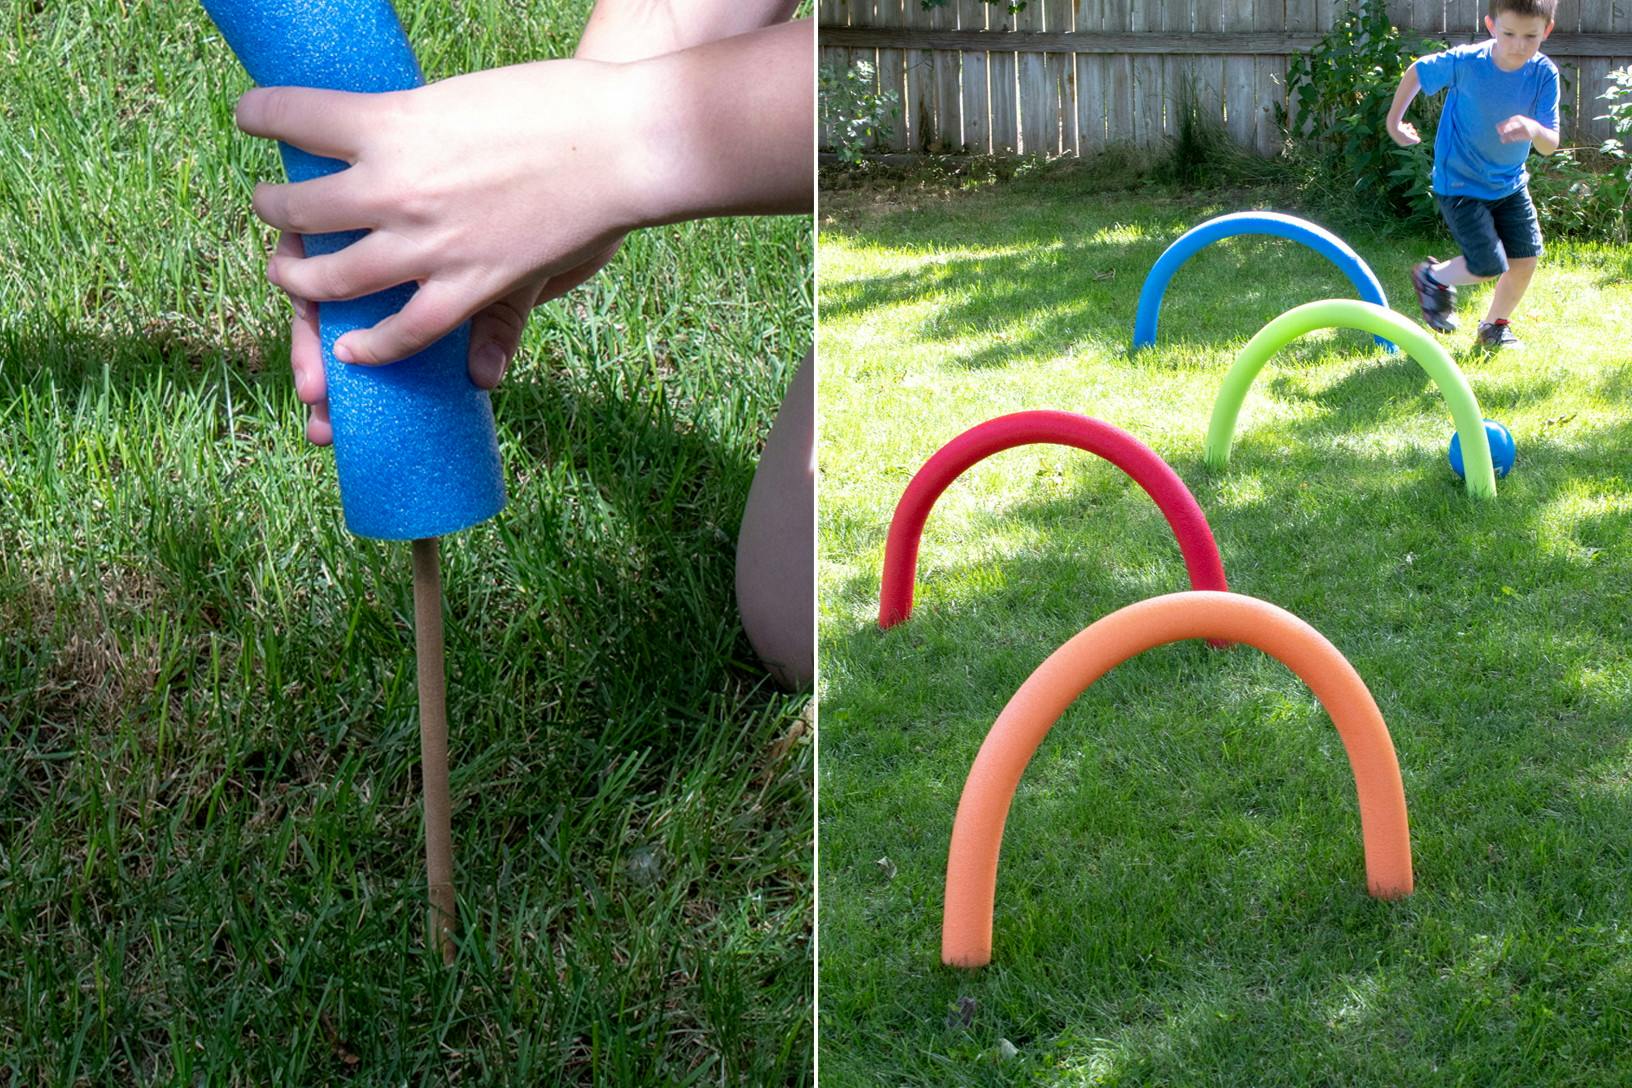 A child kicking a ball through a pool noodle obstacle course made from pool noodles and wooden dowels on a lawn.